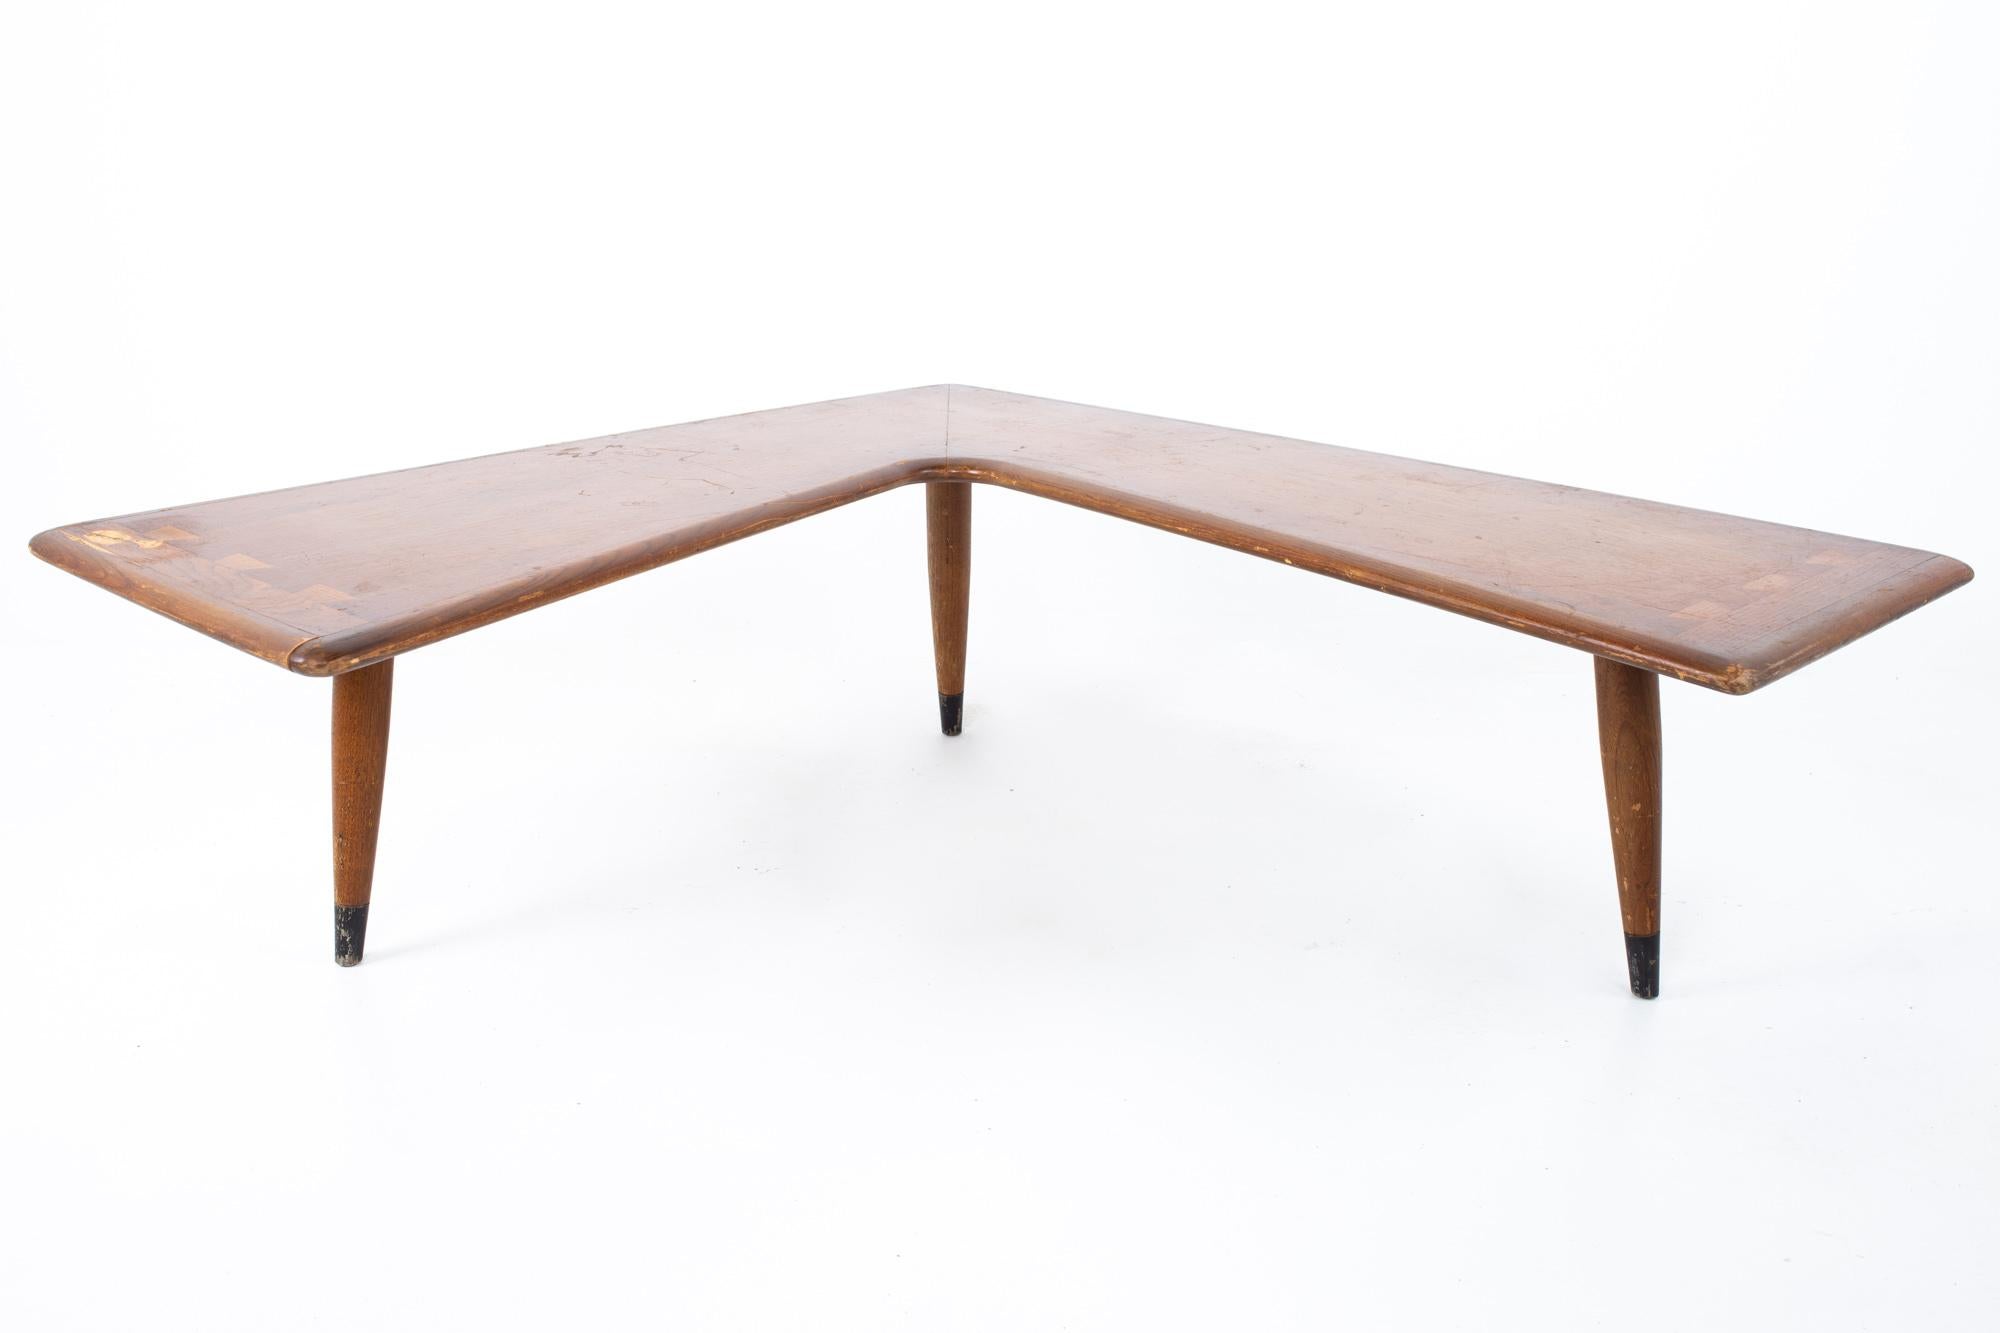 Lane Acclaim mid century walnut dovetail boomerang coffee table

Measures: 63.5 inches corner to corner, 44/48 width (depending on which side is measured), 20/17.5 deep (depending on which side is measured), 14.5 high

All pieces of furniture